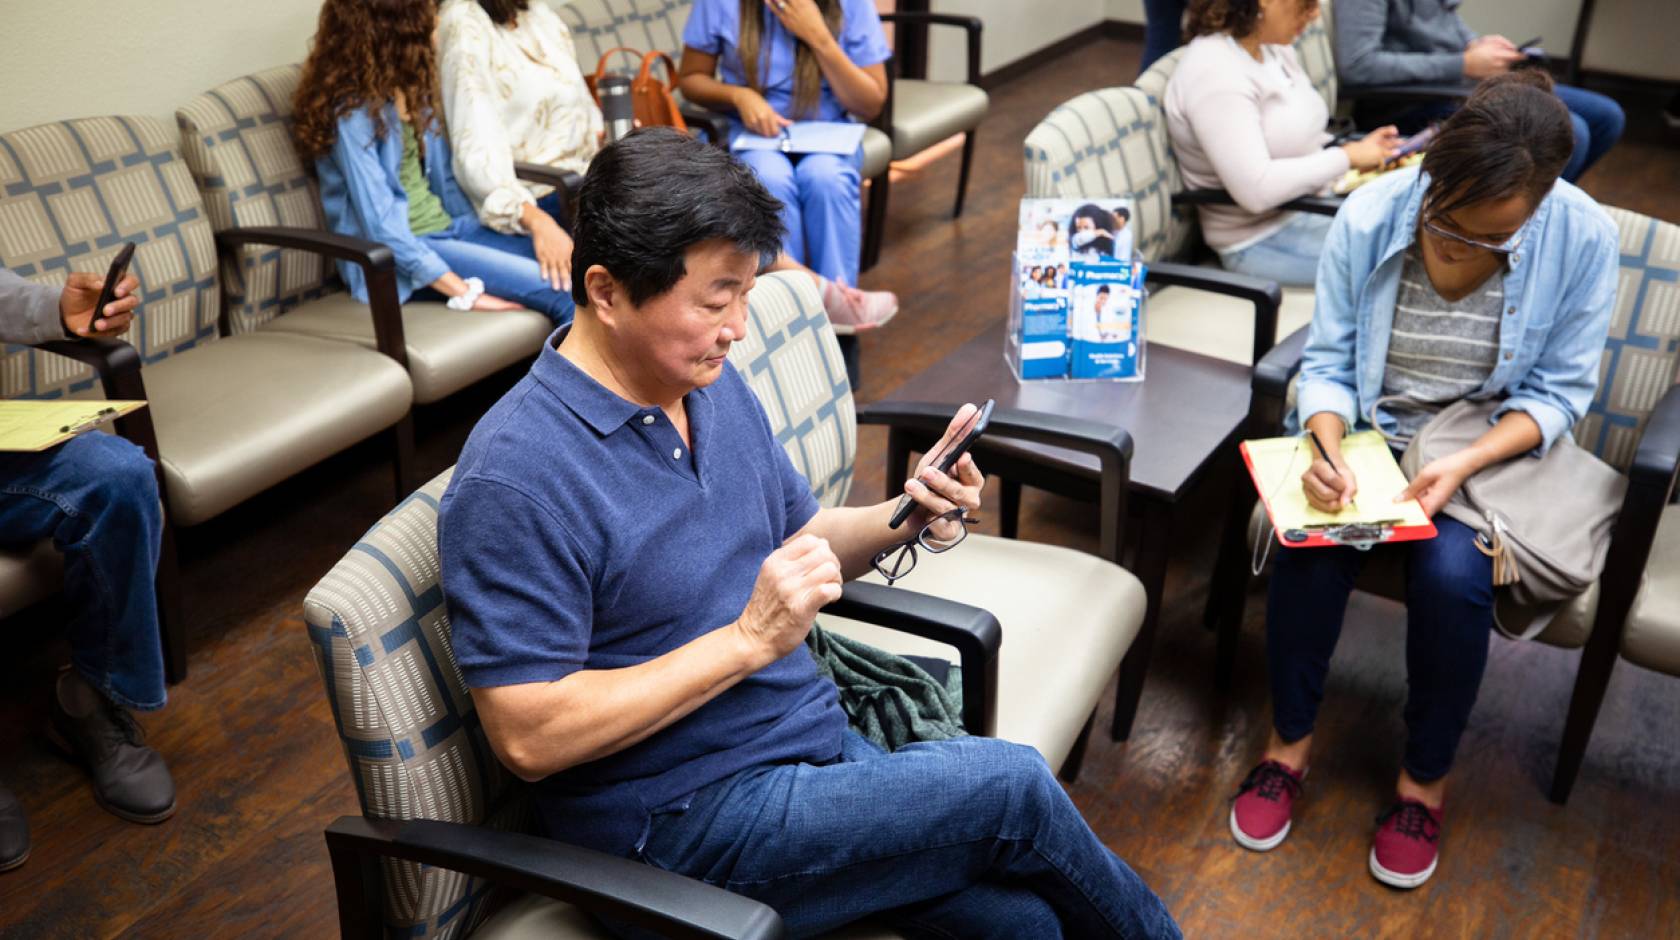 Man looks at his cell phone while waiting at a medical clinic